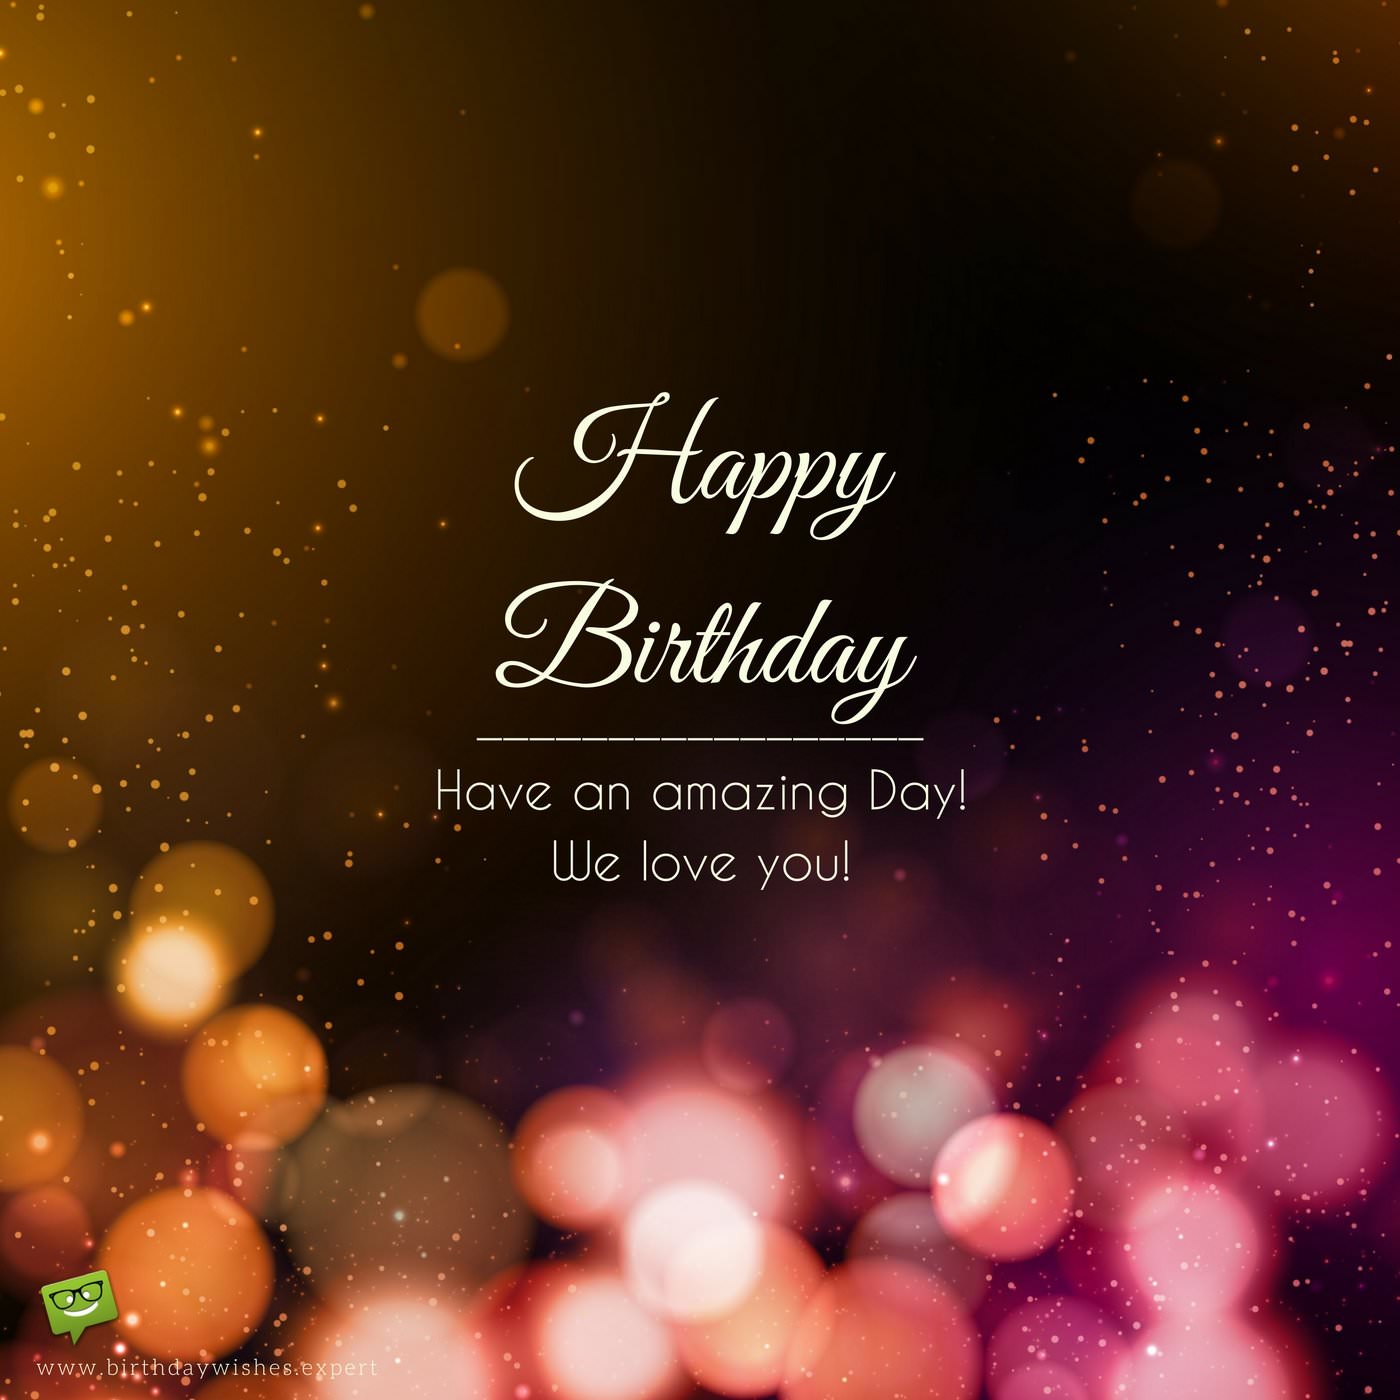 Happy BirtHDay Wish For A Friend On Abstract Background With